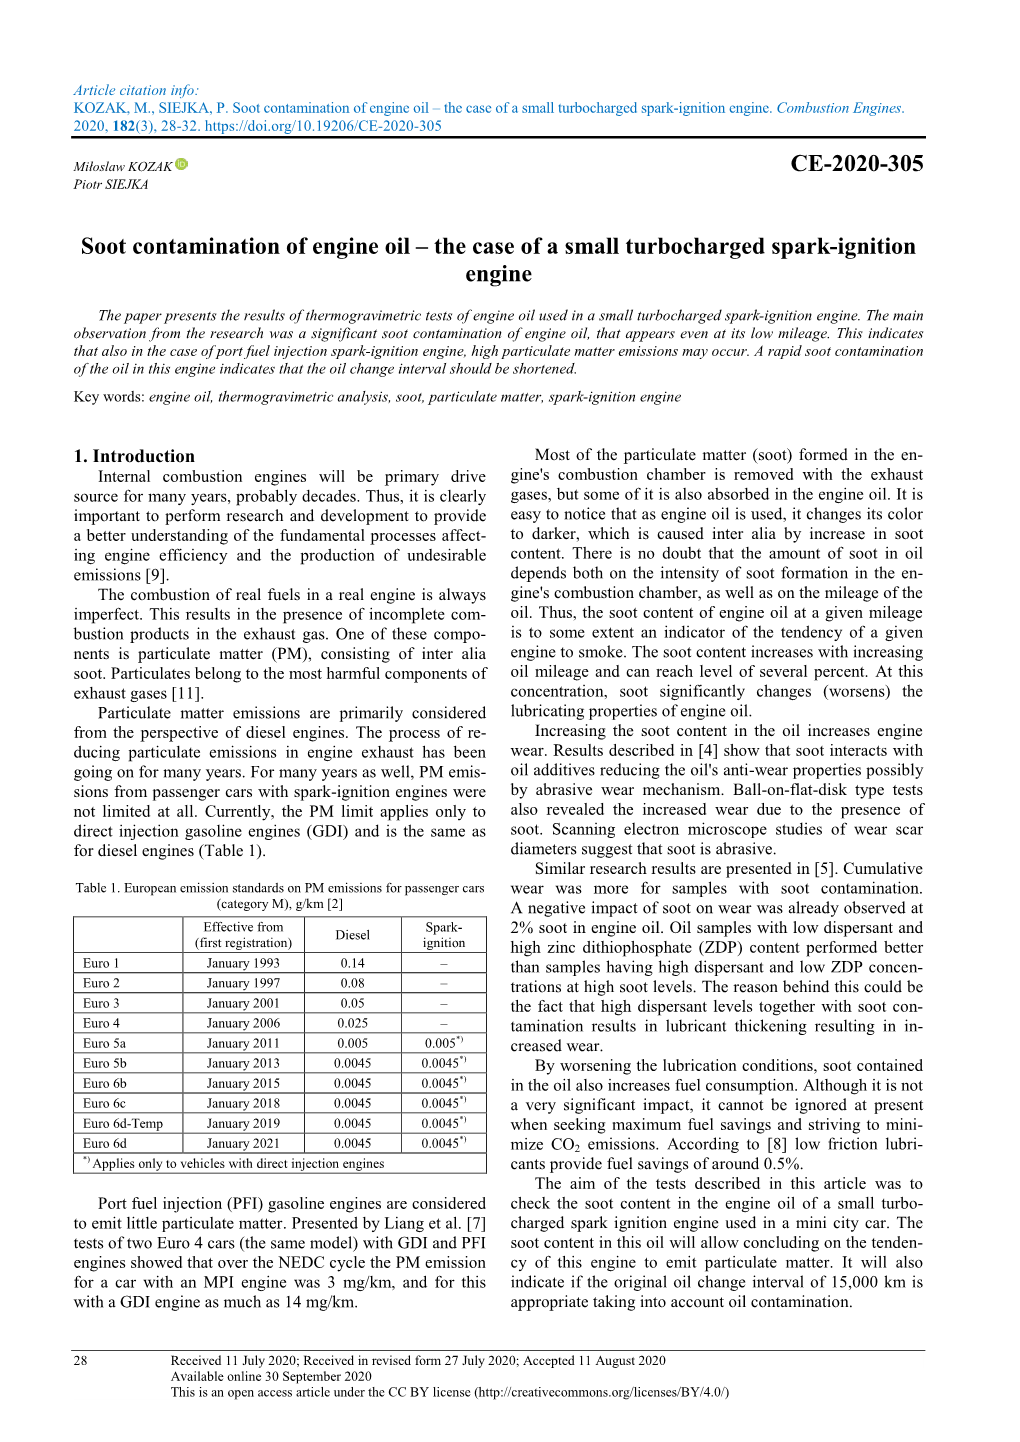 Soot Contamination of Engine Oil – the Case of a Small Turbocharged Spark-Ignition Engine